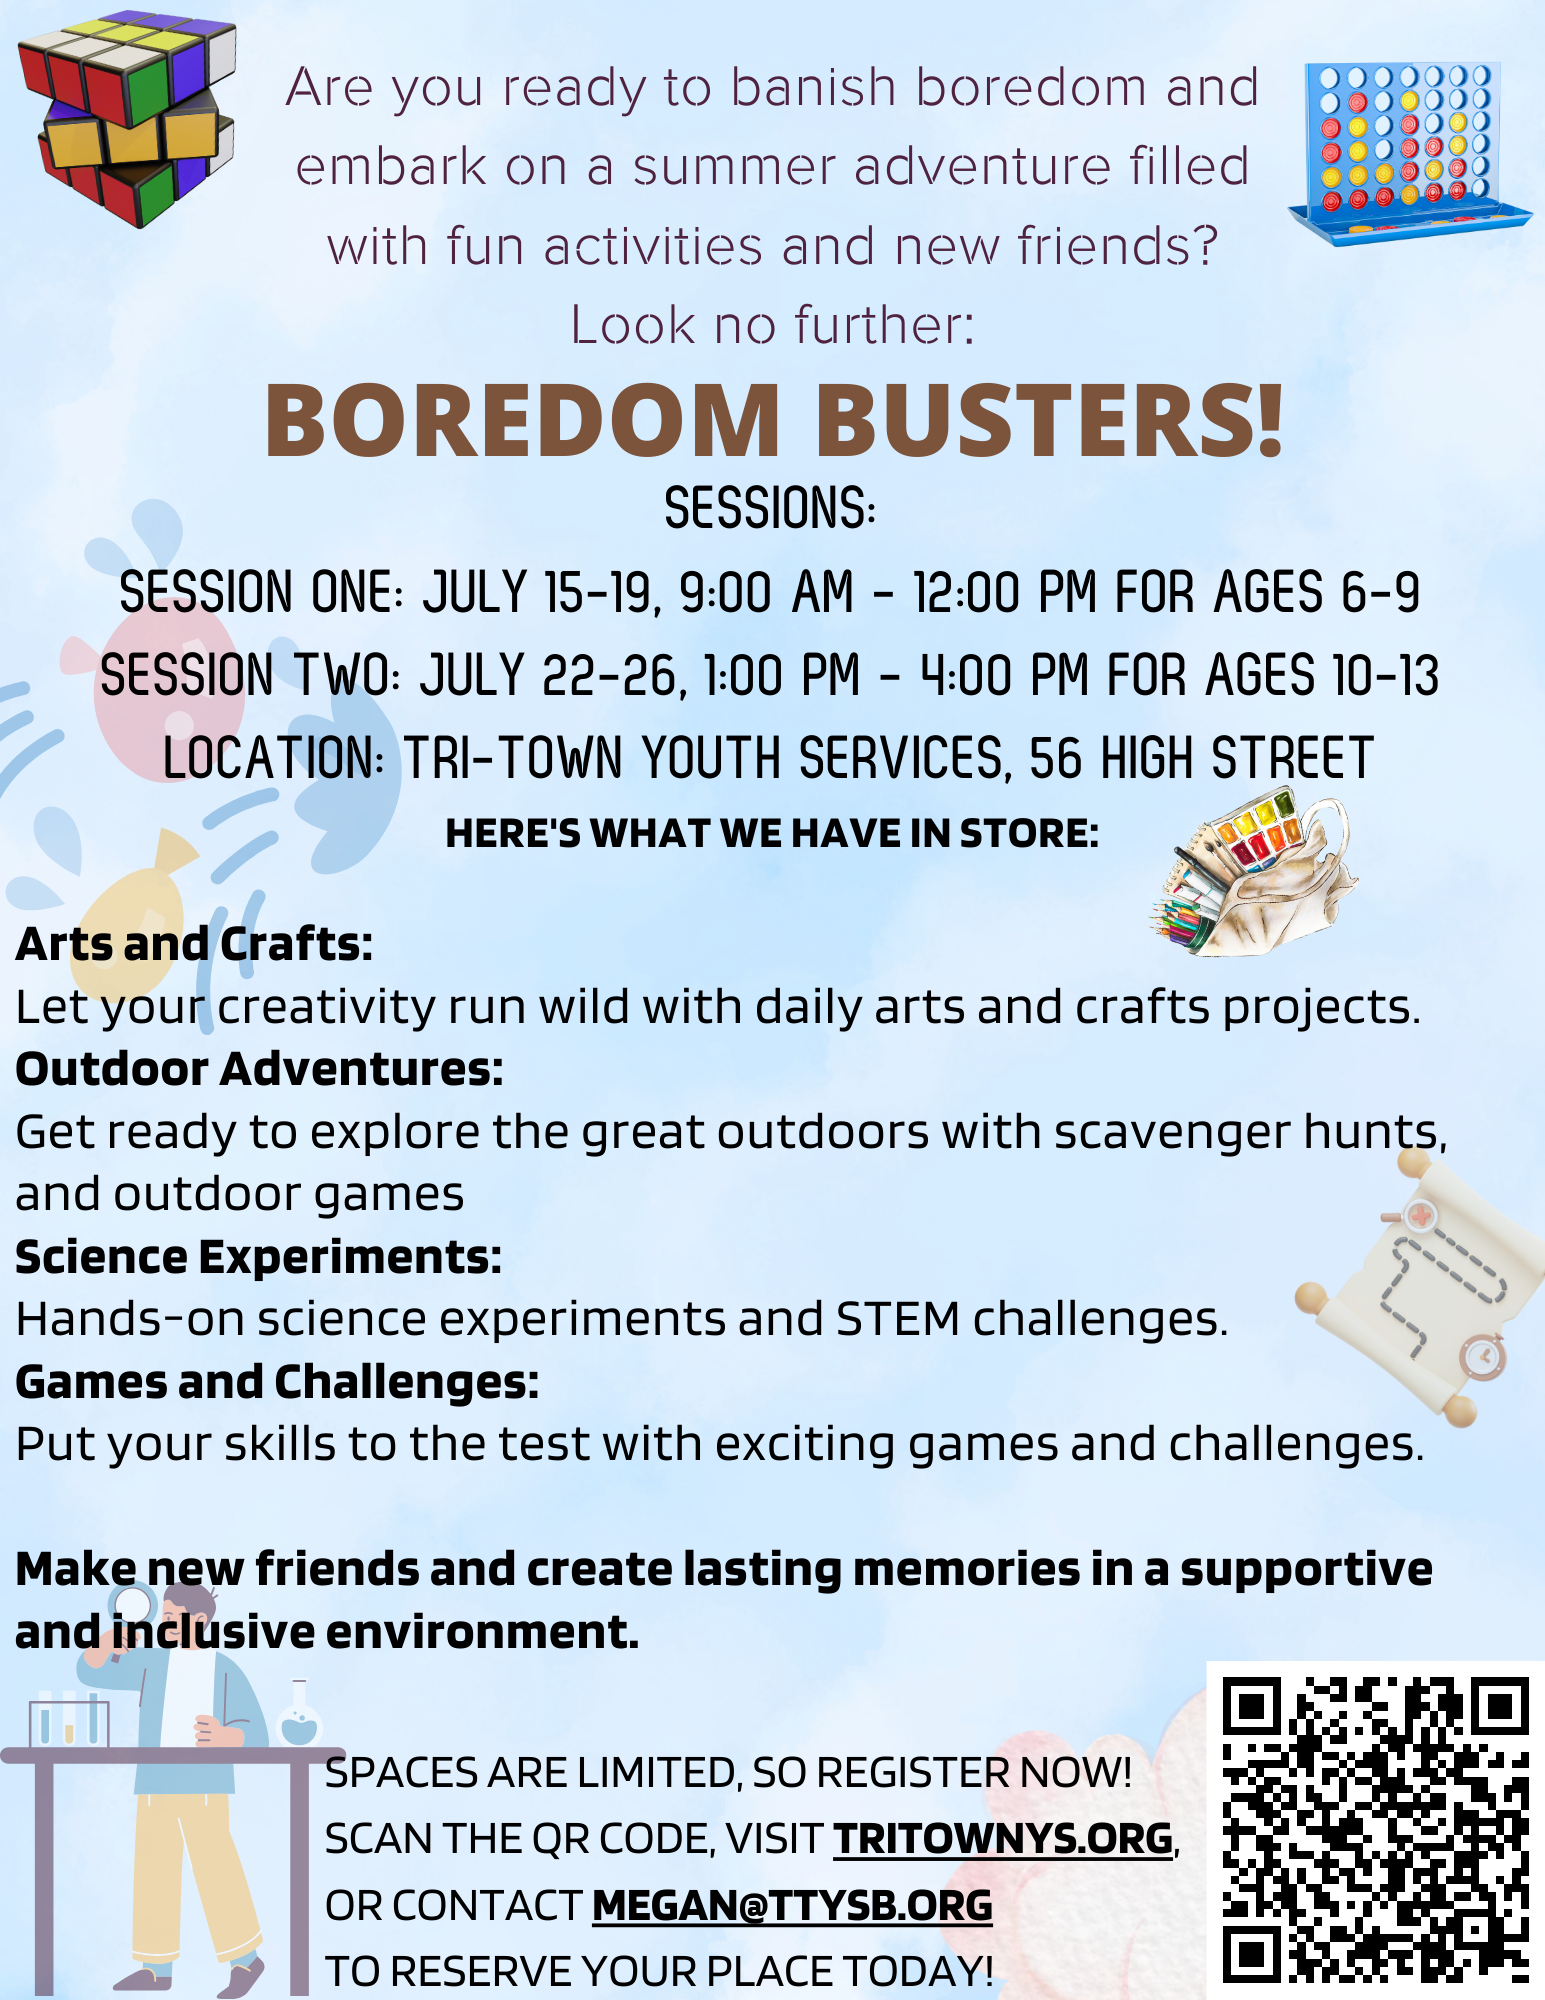 Session 1: Boredom Busters    